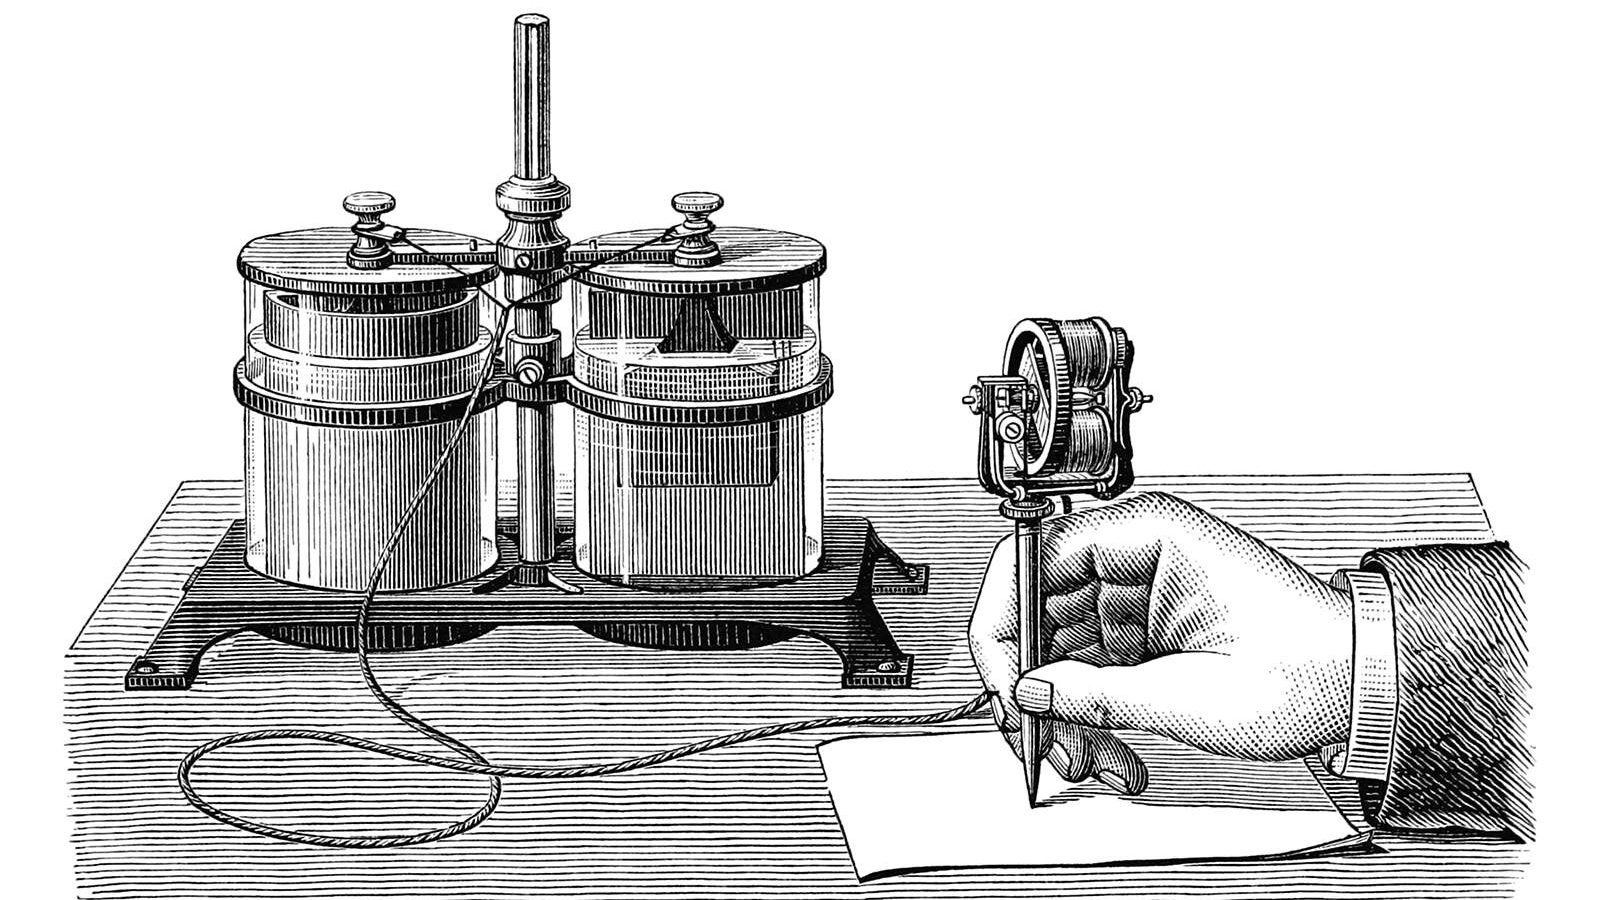 A hand is seen writing on a stencil with Edison’s electric pen connected to a wet cell battery. Edison’s electric pen was a device used for duplicating handwritten or hand-drawn documents.